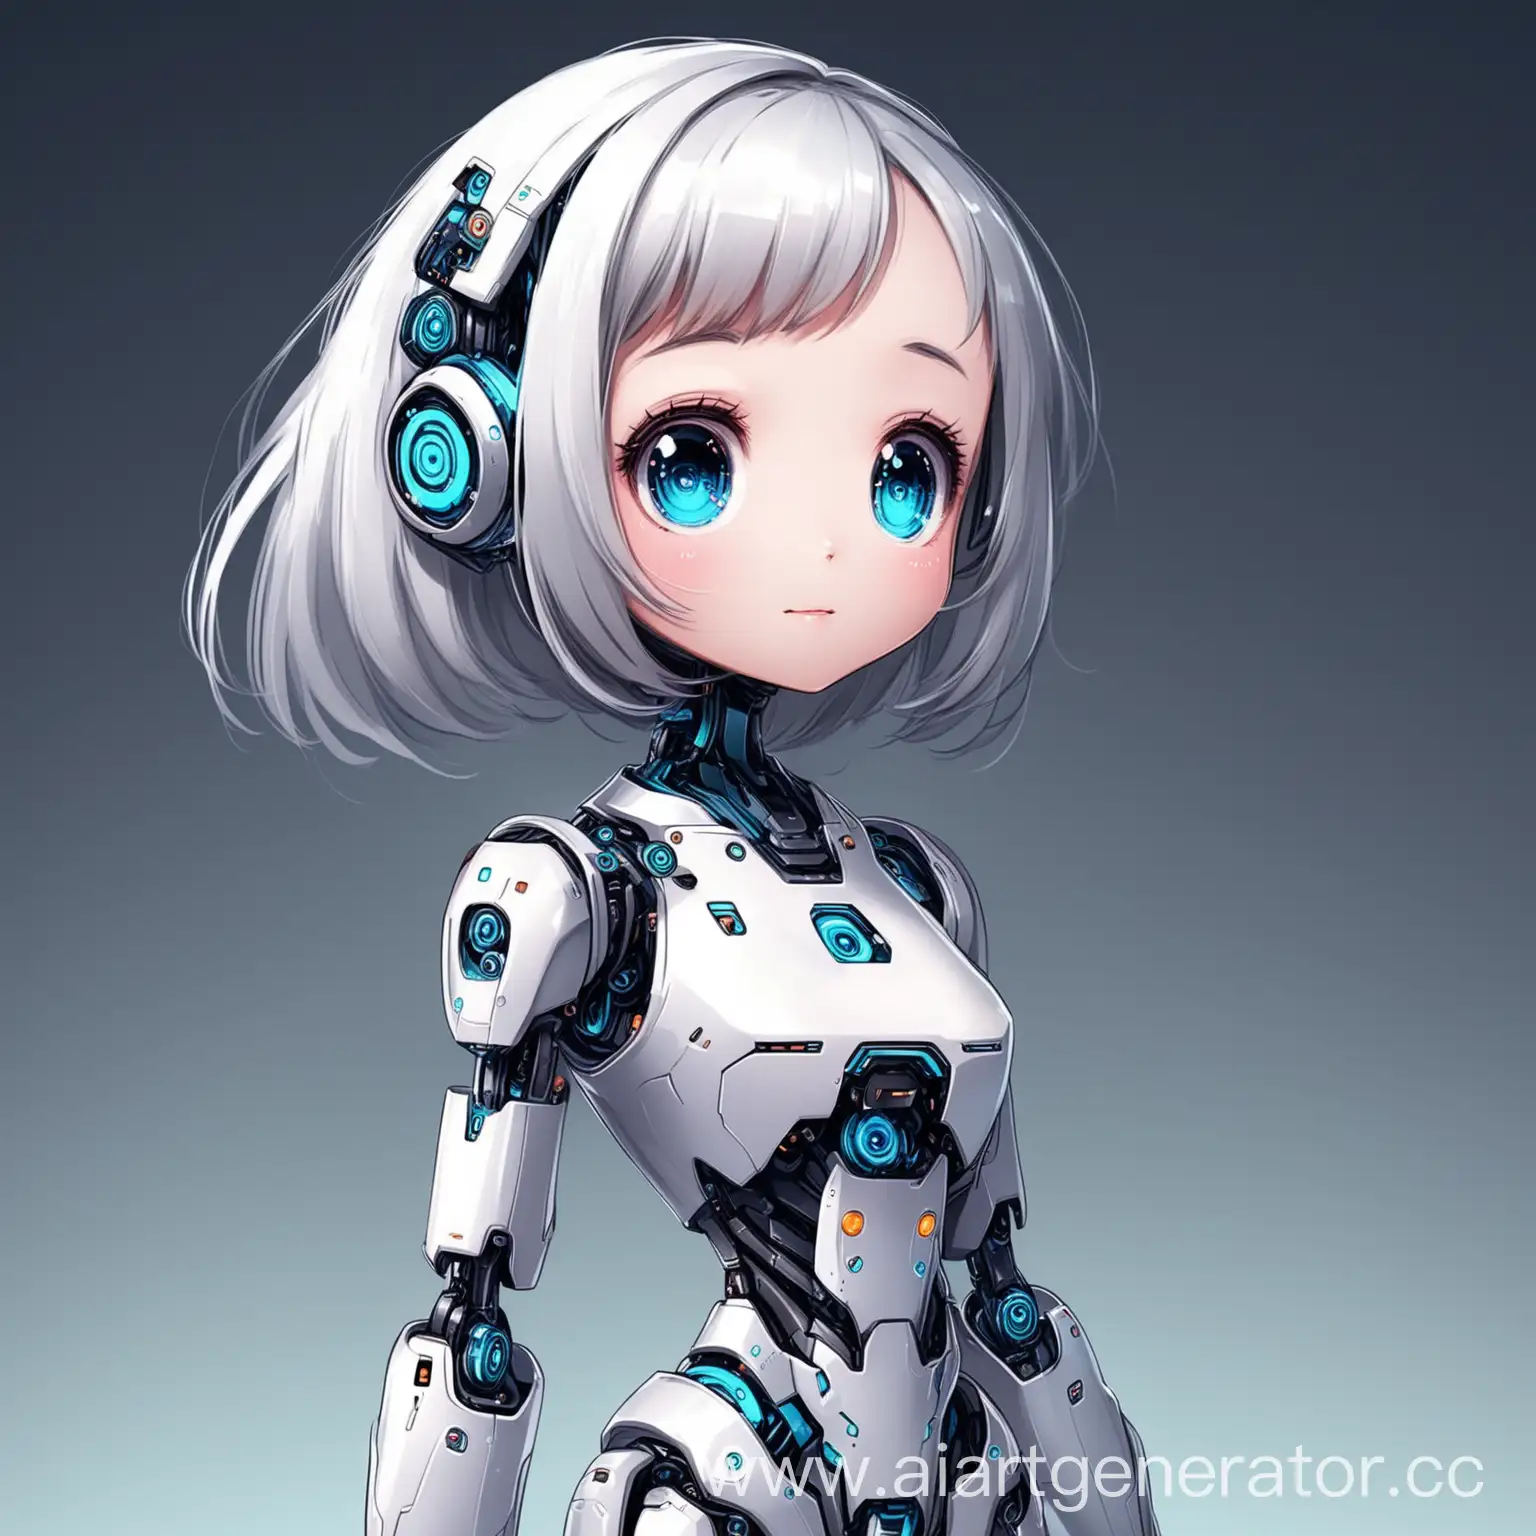 Adorable-Robot-Girl-with-Playful-Expression